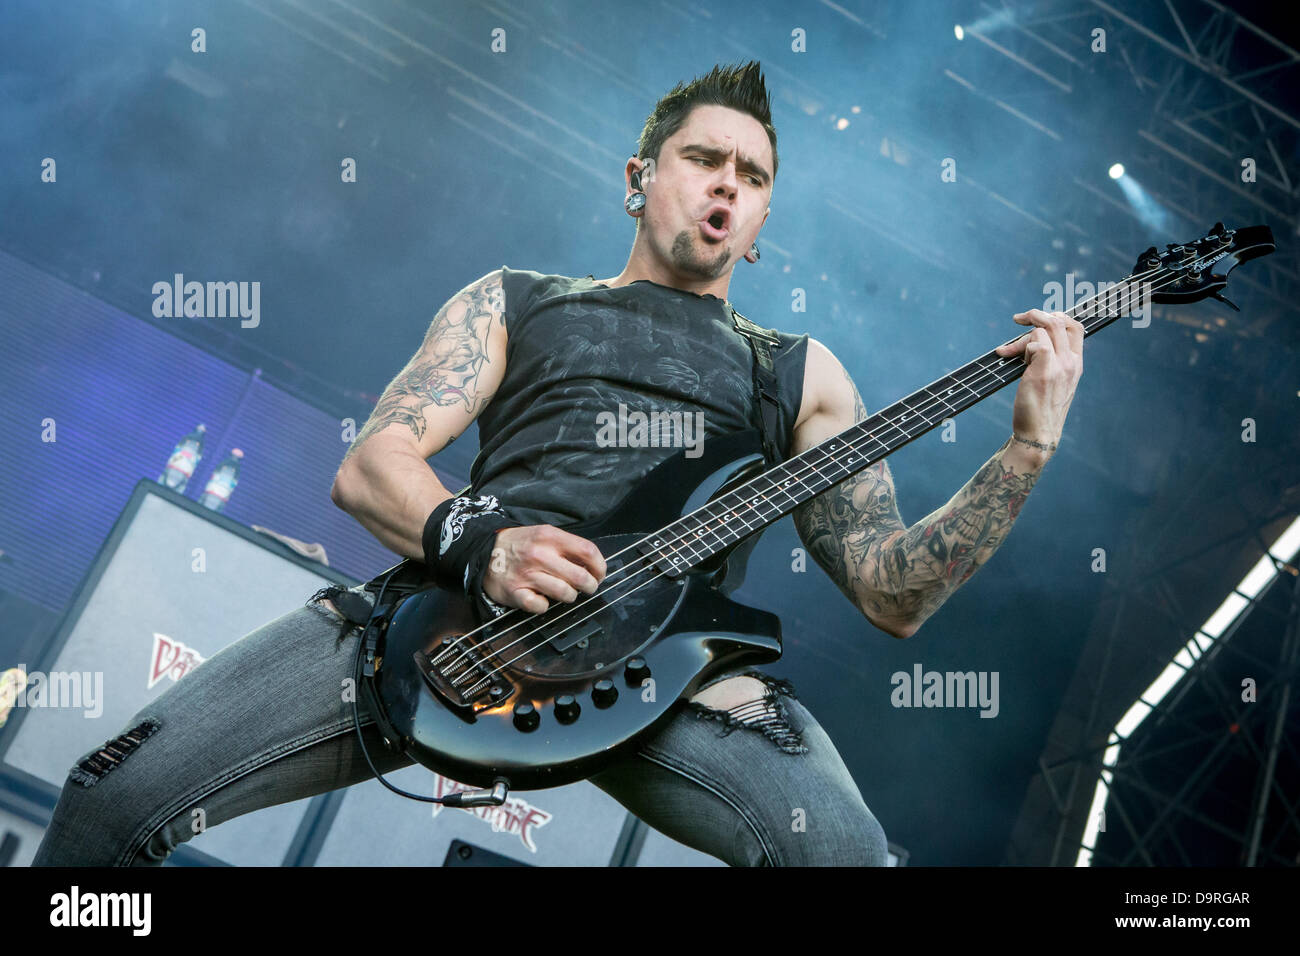 Milan Italy. 24th June 2013. The British metal core band BULLET FOR MY VALENTINE performs live at Ippodromo del Galoppo opening the show of Korn Credit:  Rodolfo Sassano/Alamy Live News Stock Photo